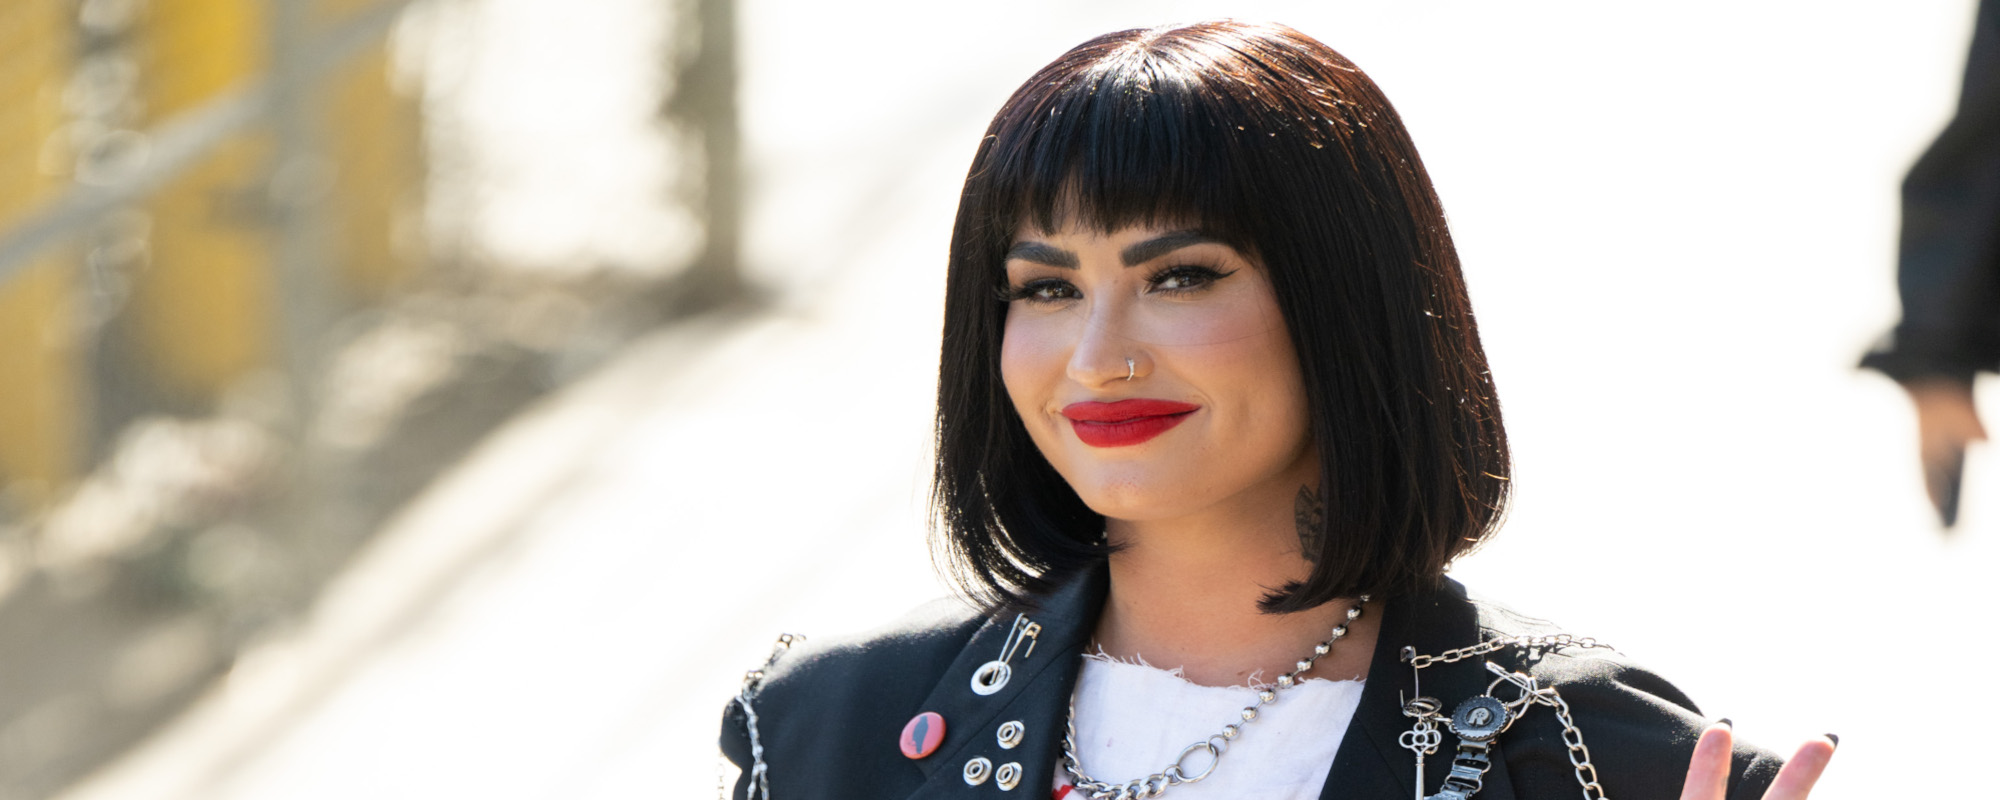 Demi Lovato Seemingly Criticizes Actor Wilmer Valderrama for Grooming in New Song “29”